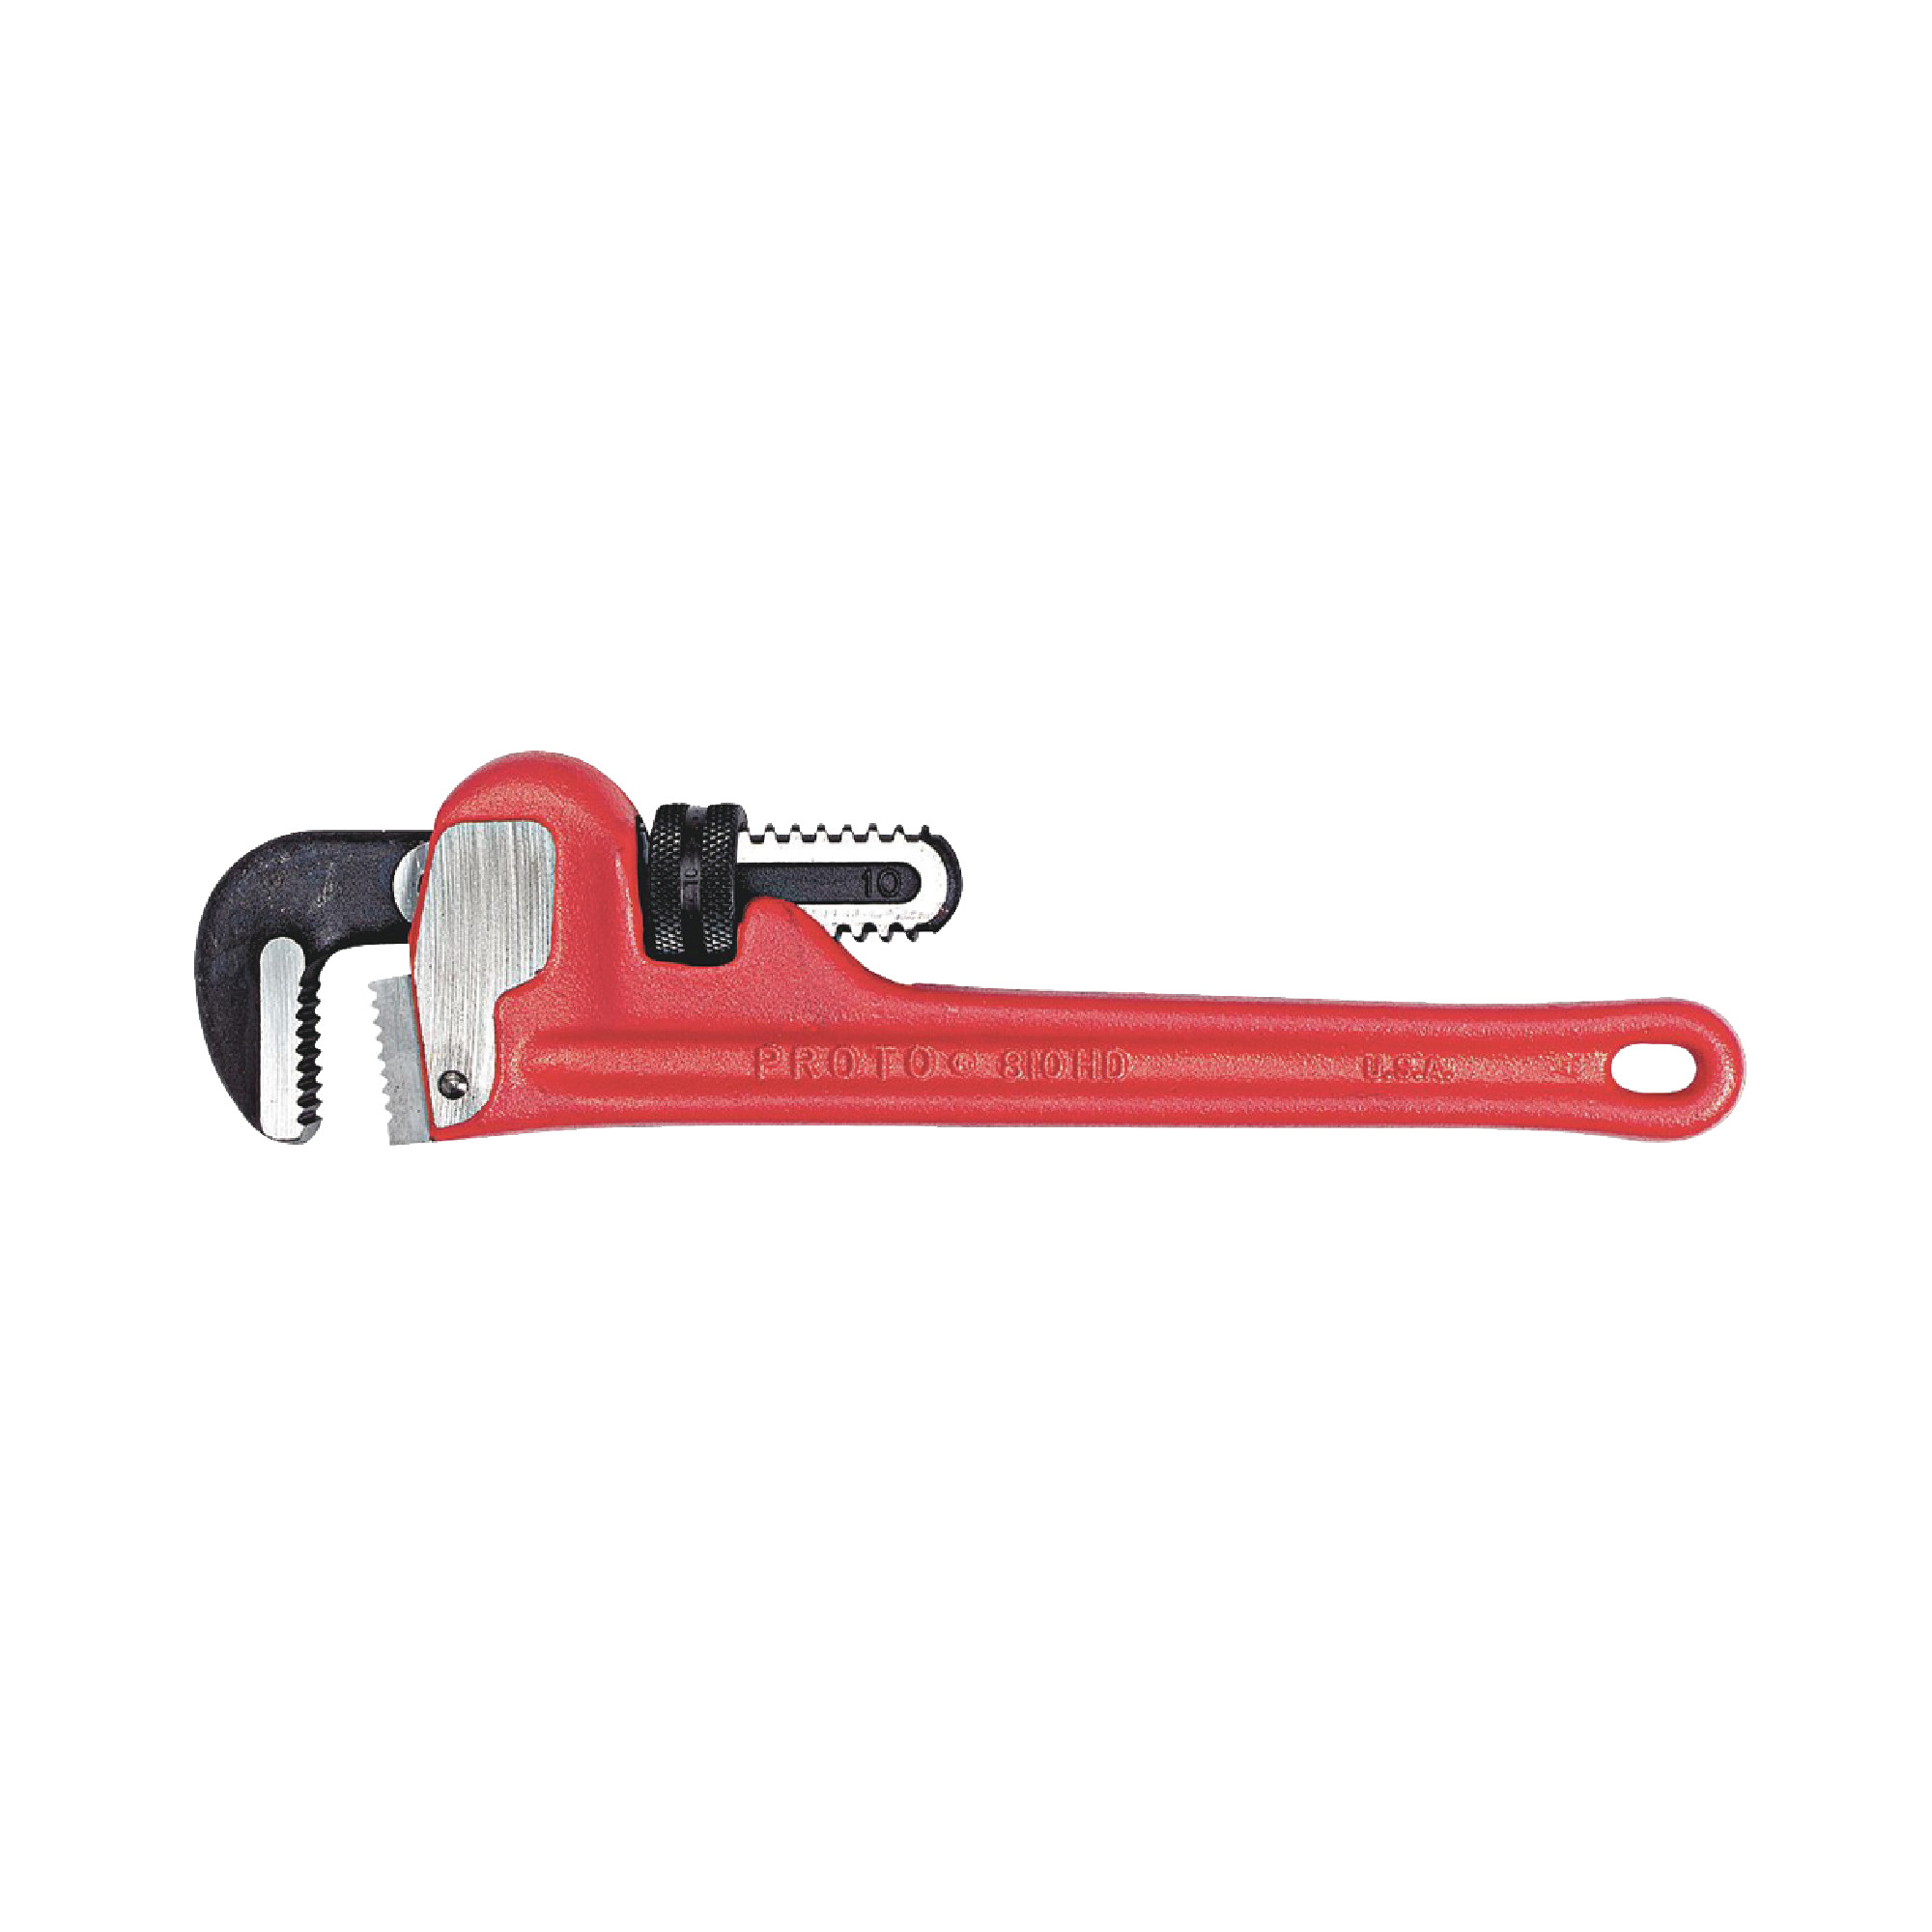 10" Cast Iron Pipe Wrench - Model: J810HD